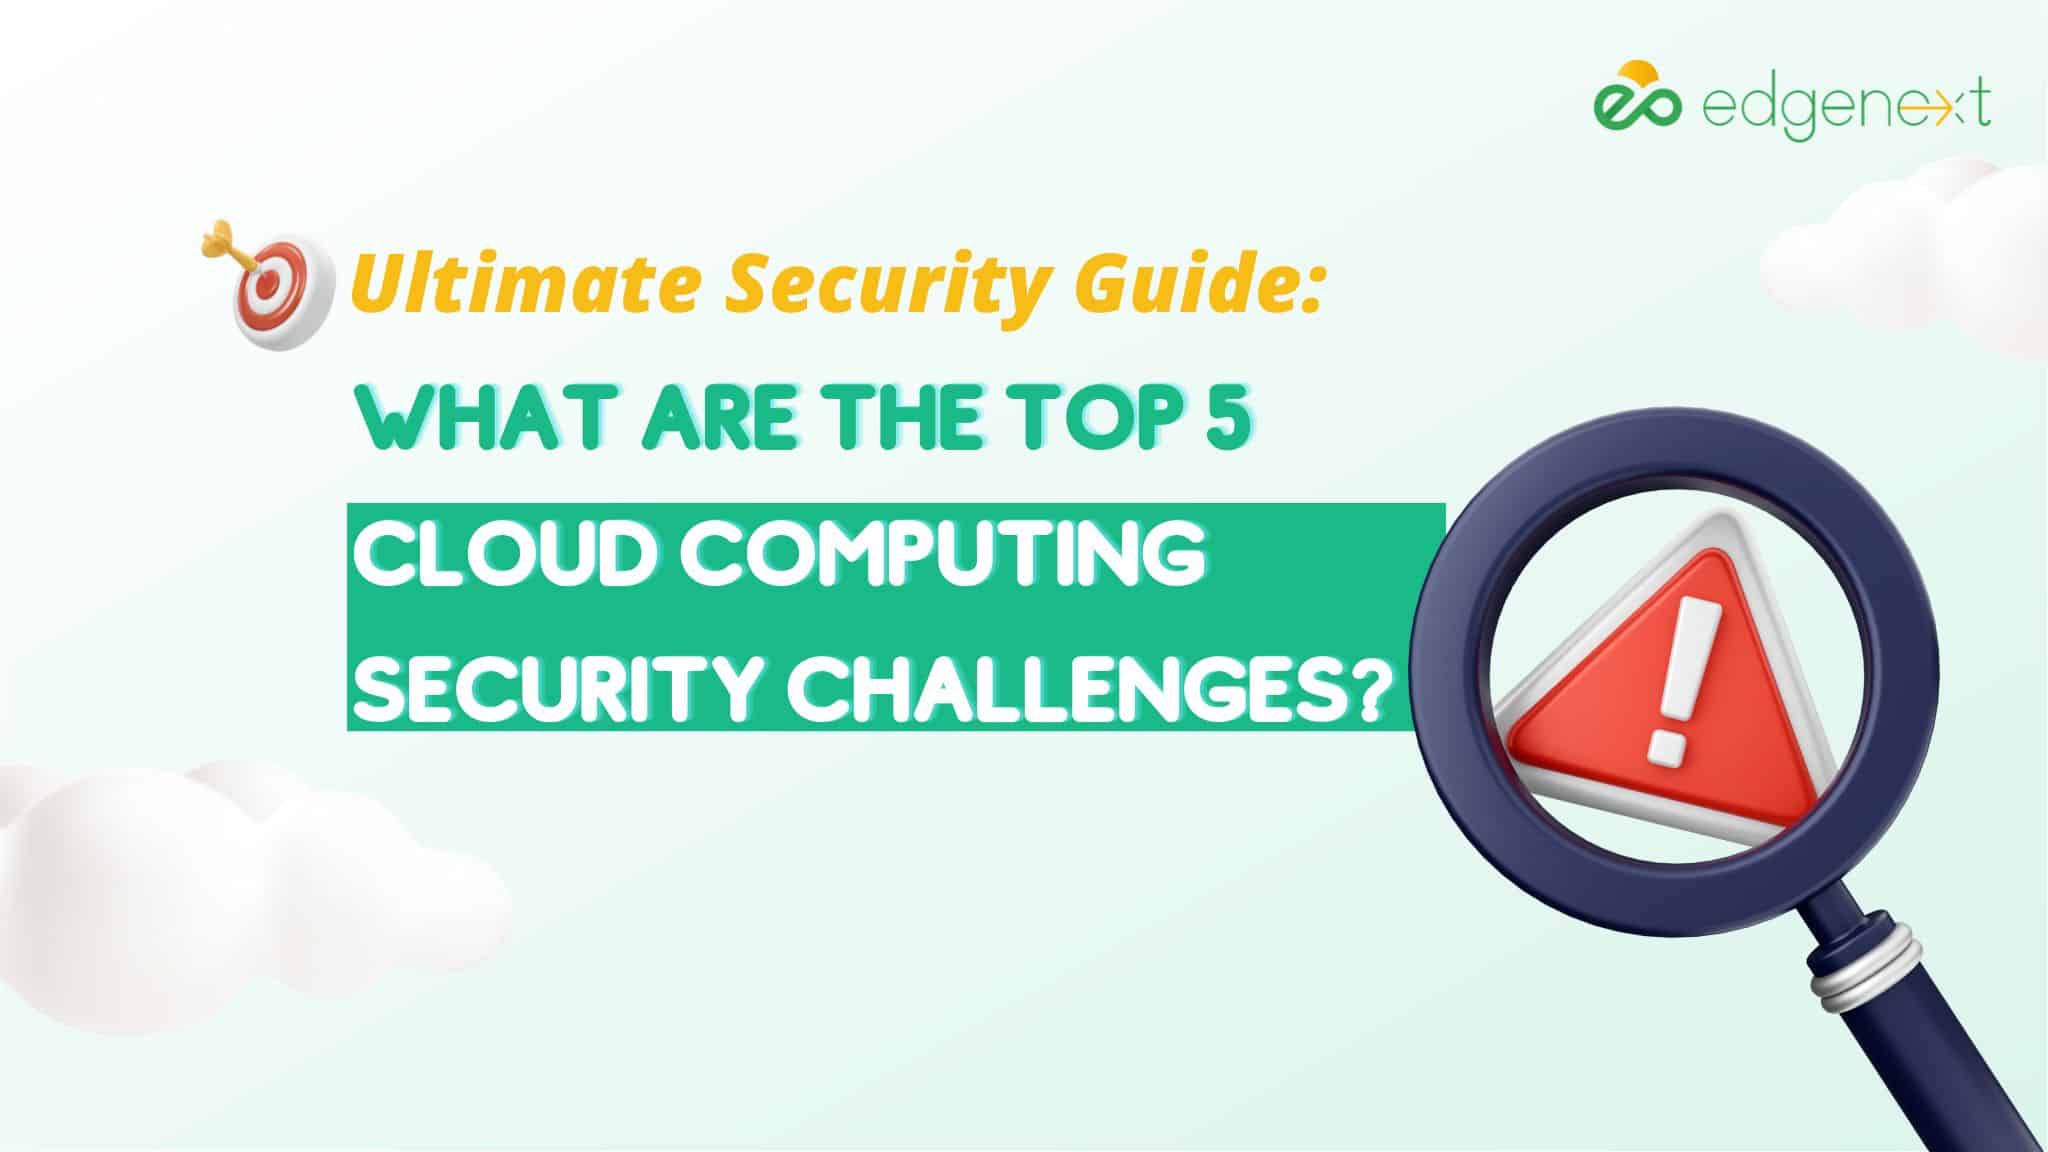 What Are the Top 5 Cloud Computing Security Challenges?